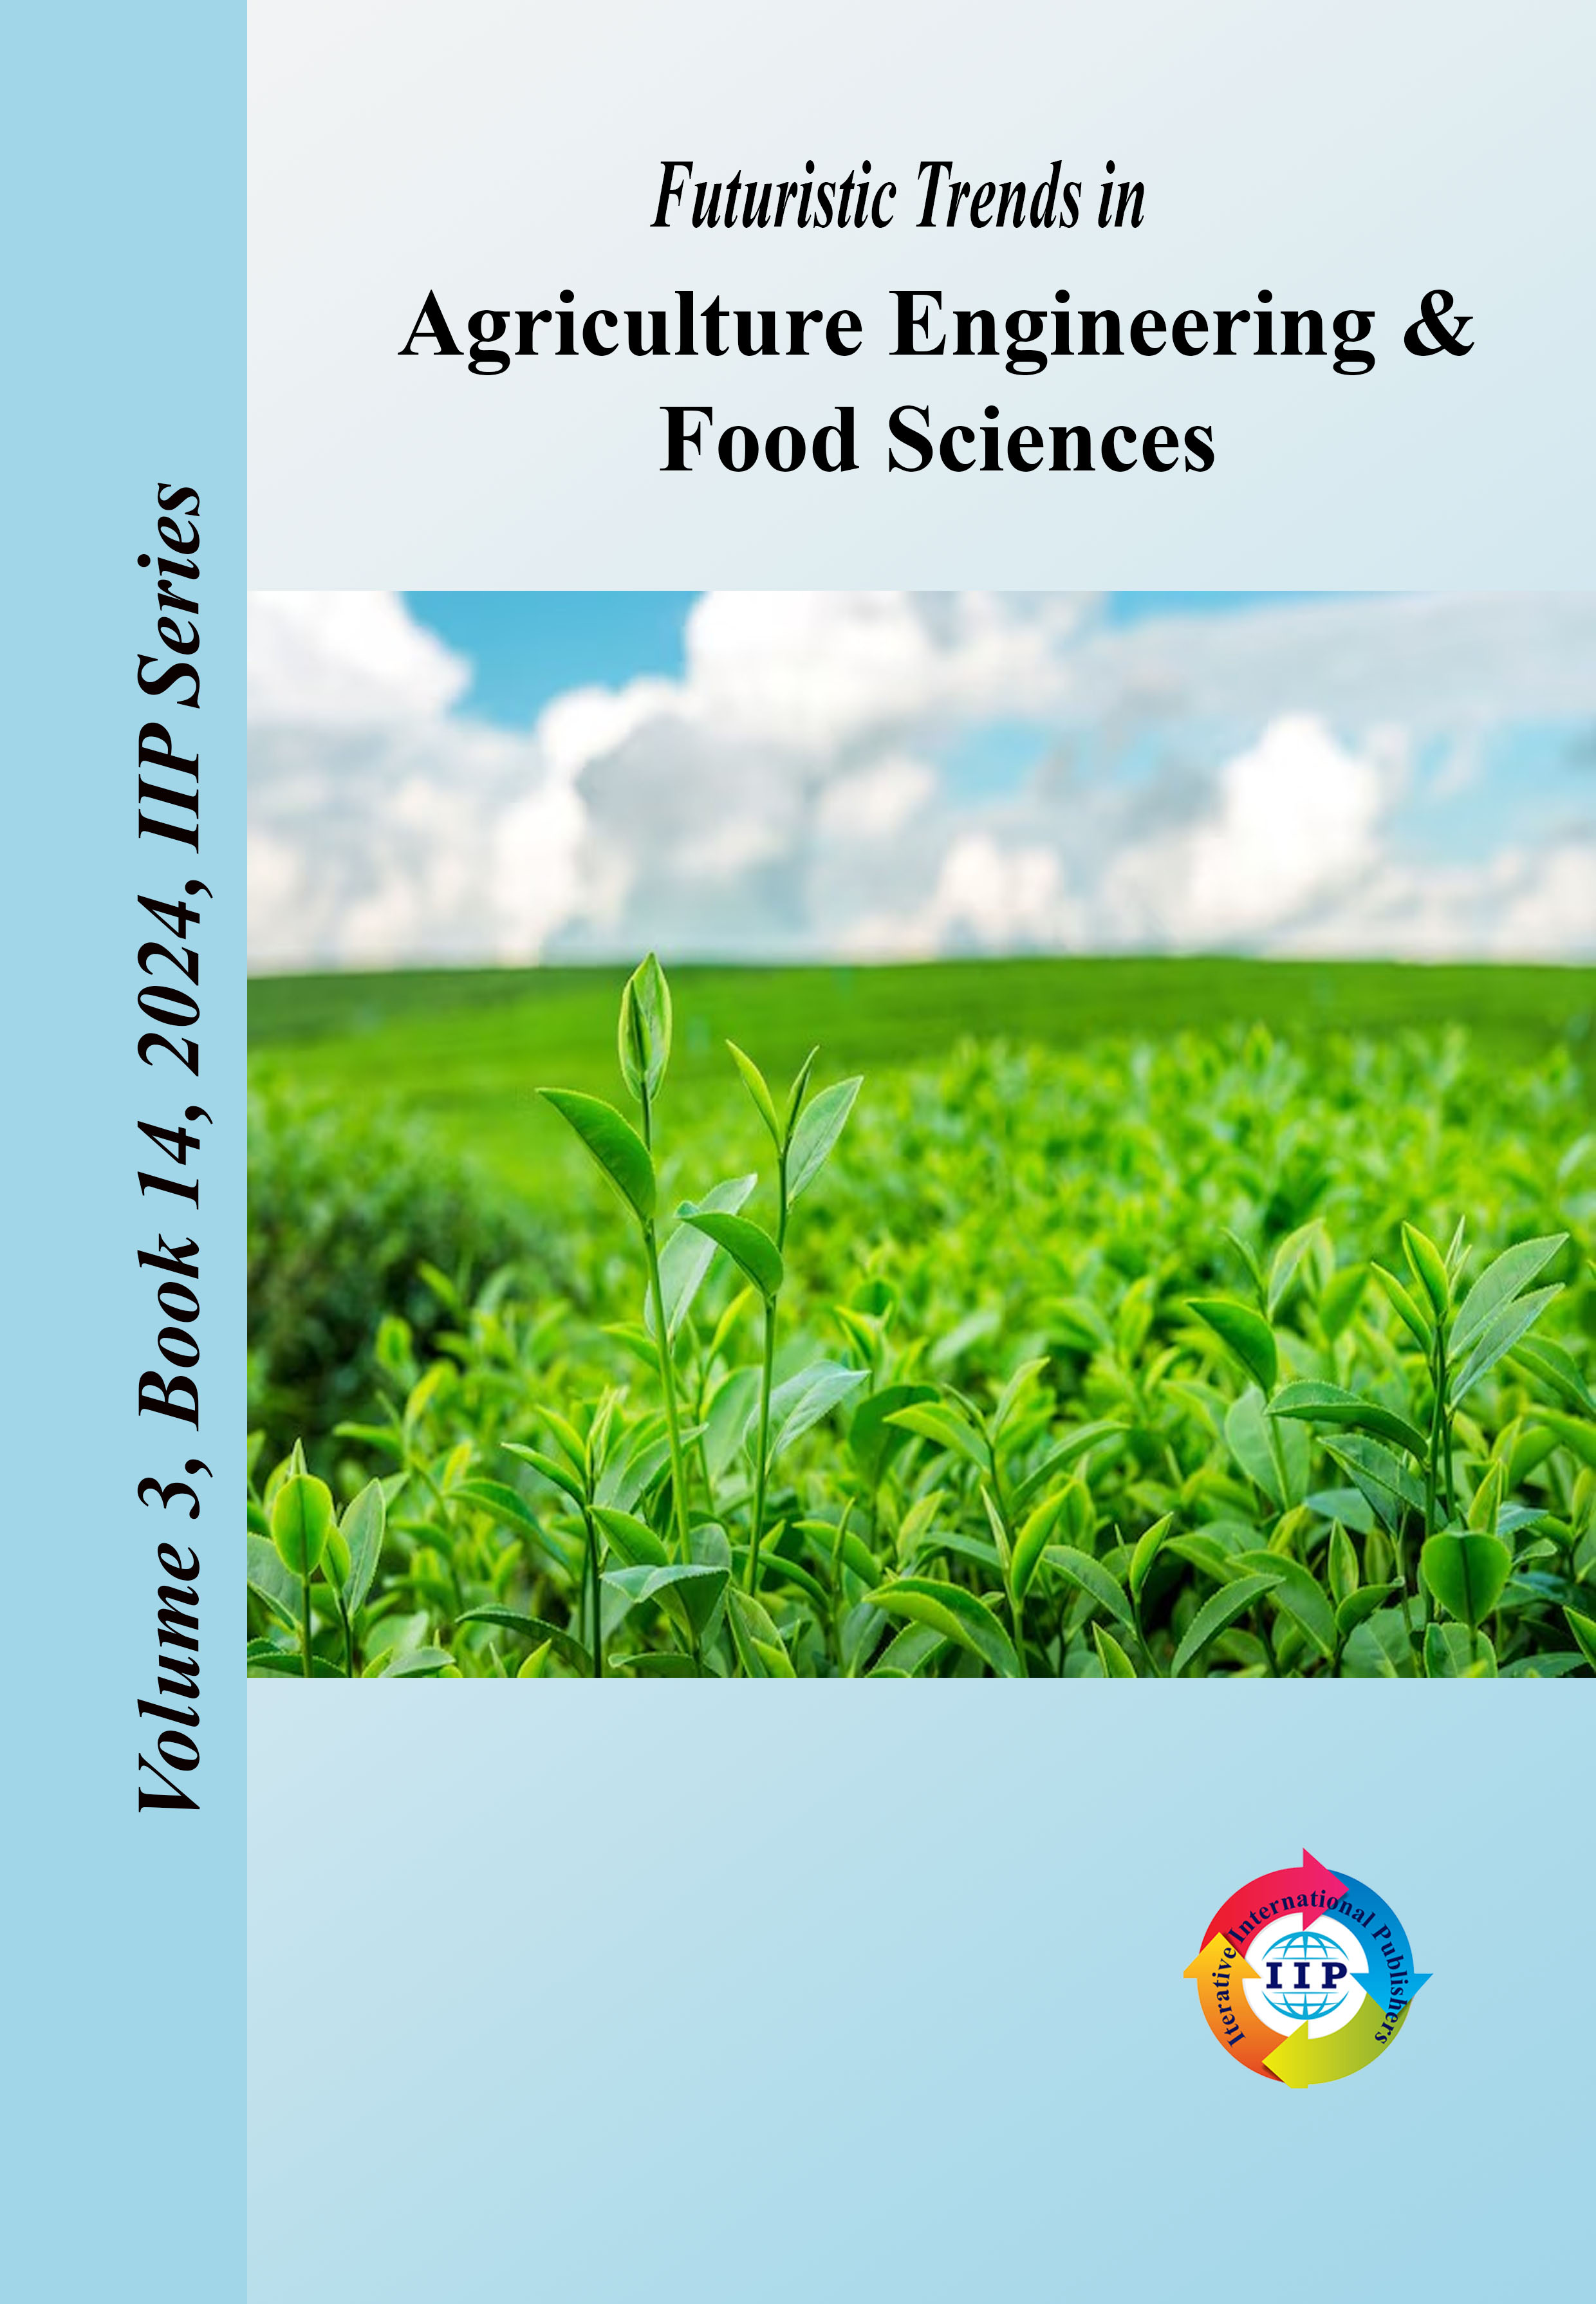 Futuristic Trends in Agriculture Engineering & Food Sciences Volume 3 Book 14